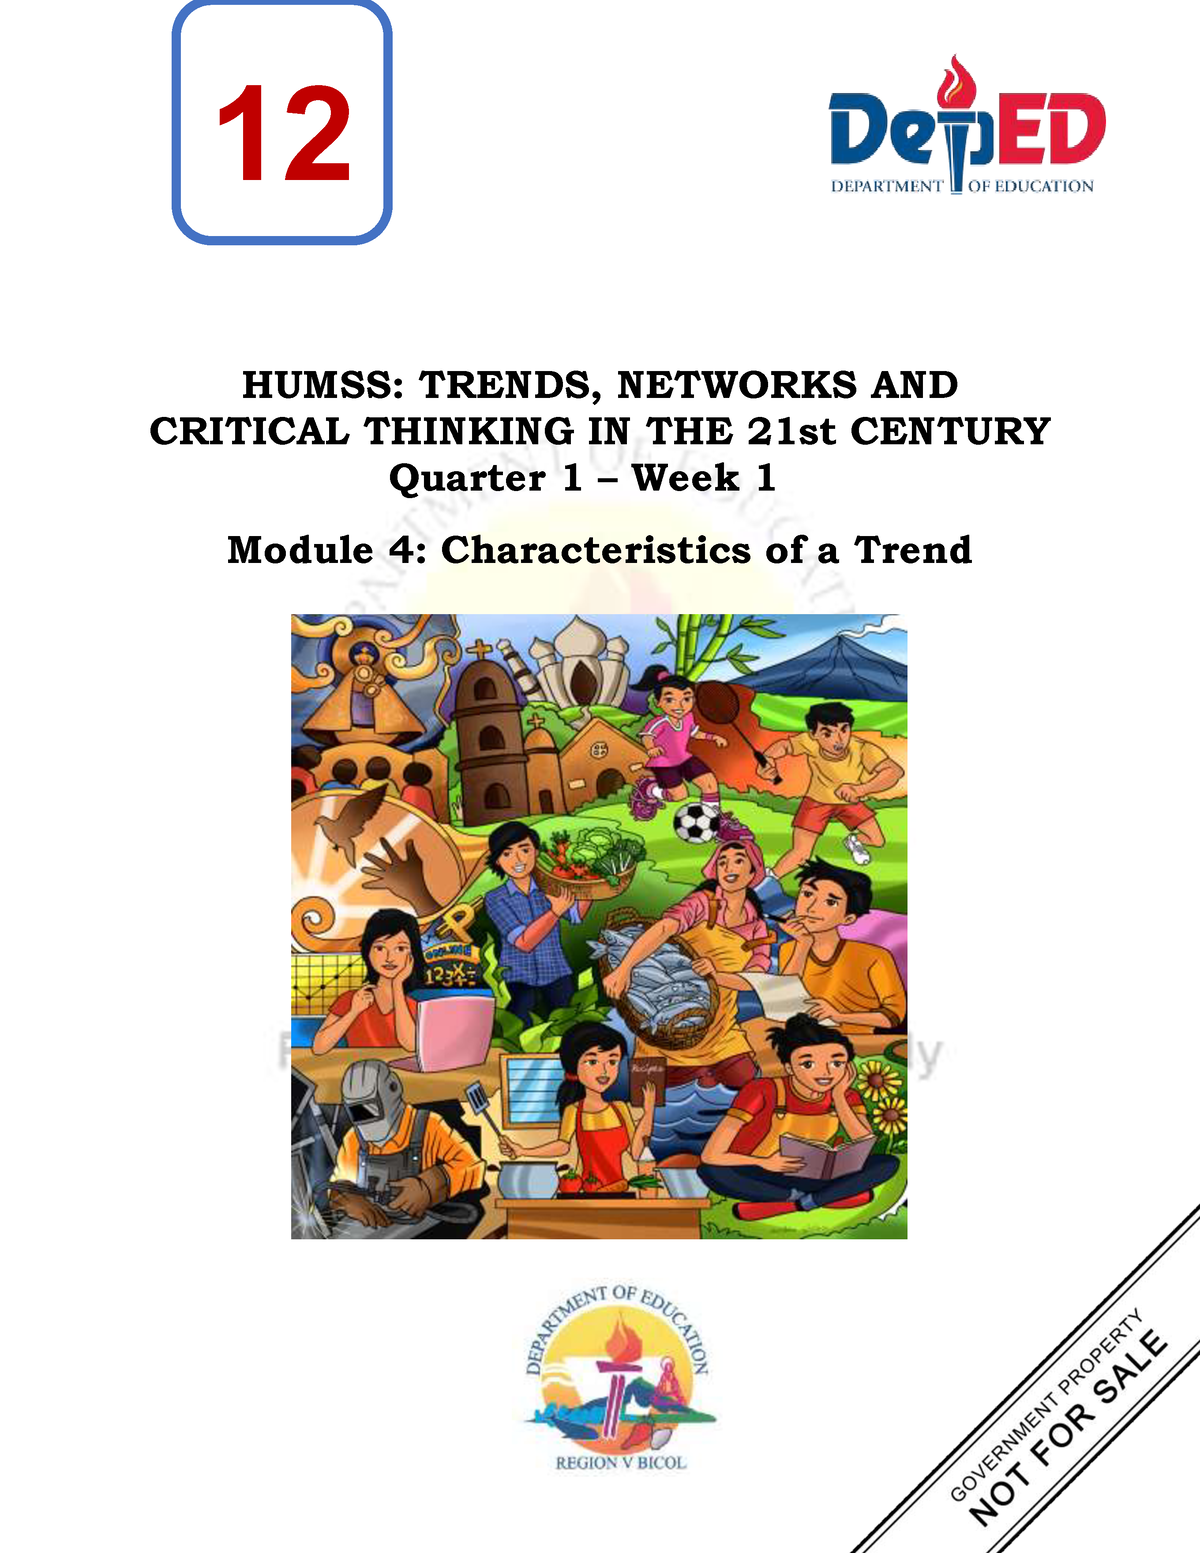 trends networks and critical thinking in the 21st century reviewer